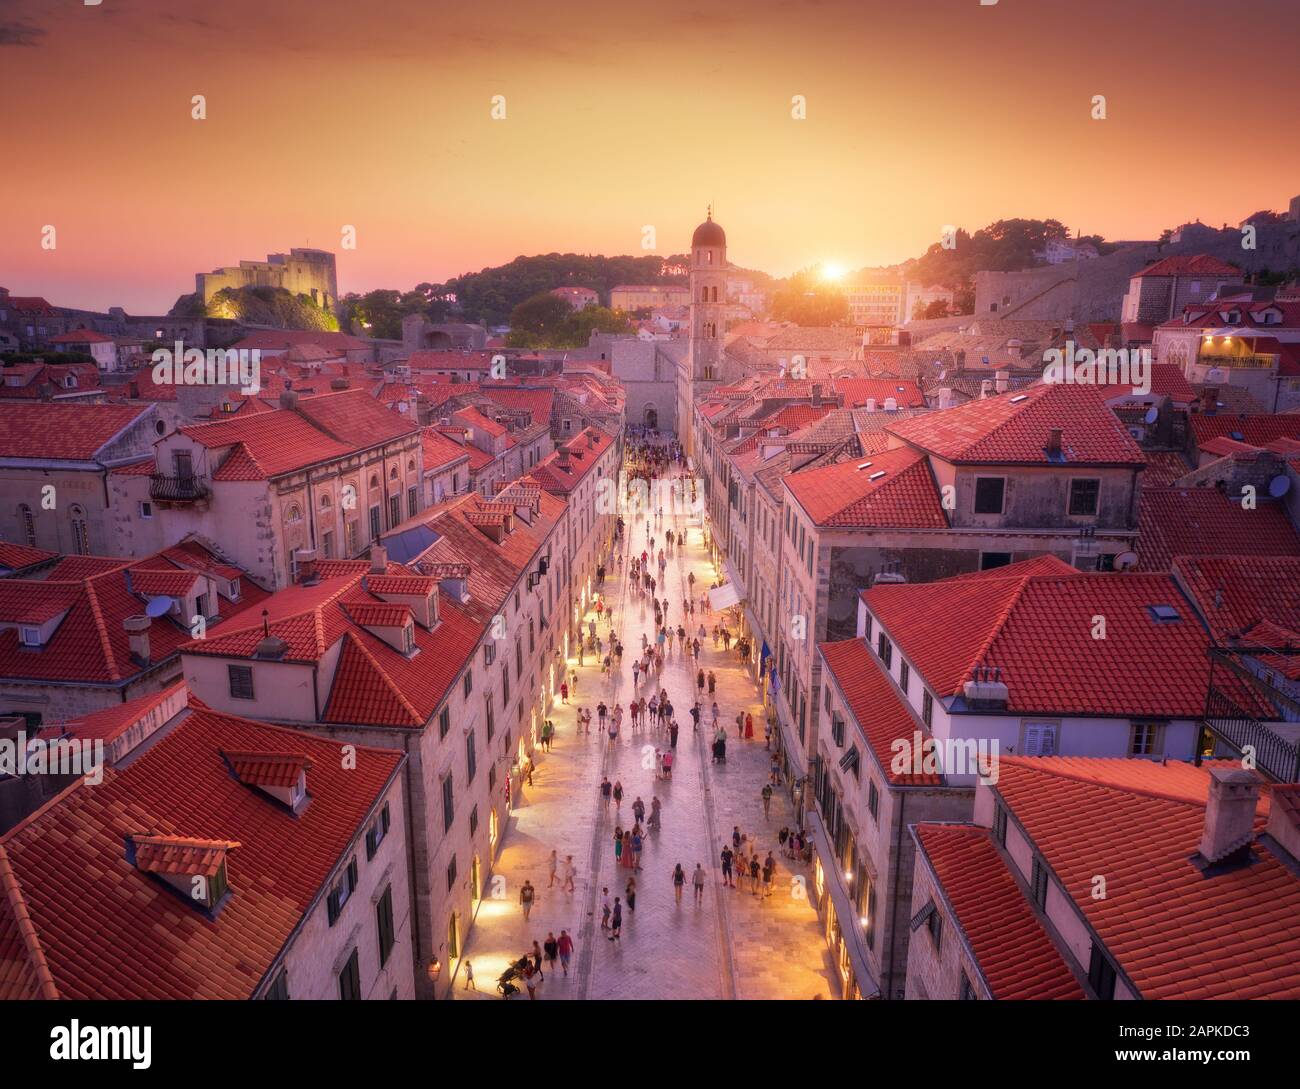 Aerial view of beautiful old city at sunset. Top view Stock Photo